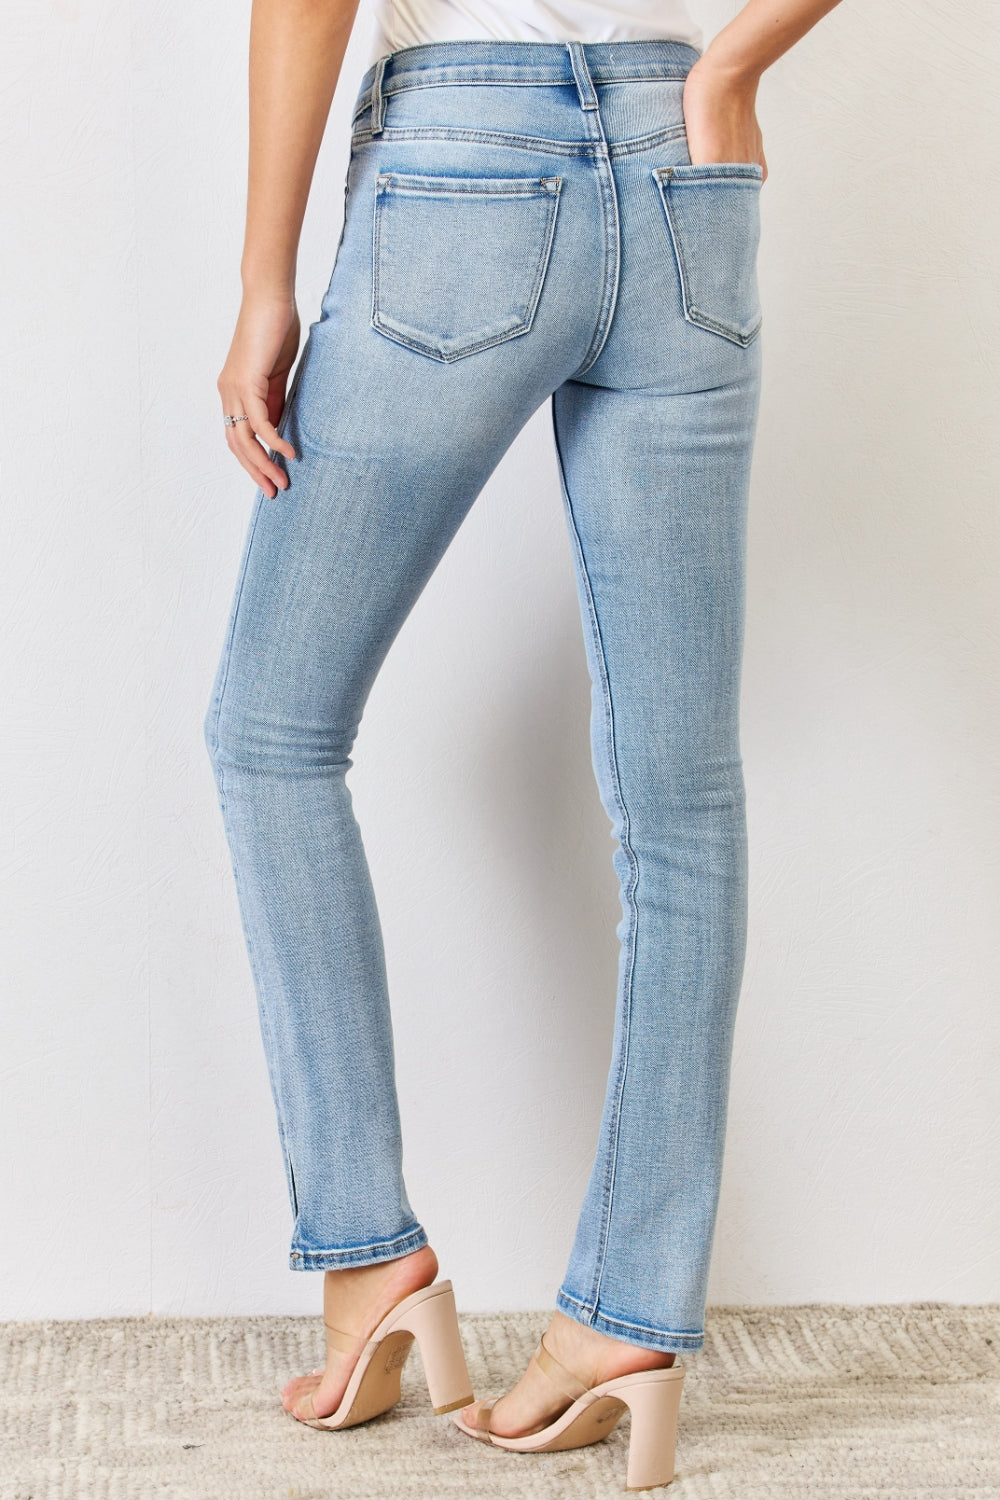 These jeans offer both style and comfort, hugging your curves while ensuring freedom of movement. The sleek side slit detail adds a modern twist, elevating the classic bootcut silhouette. Featuring a chic zip fly and a regular hem, these jeans exude sophistication. 1-20W